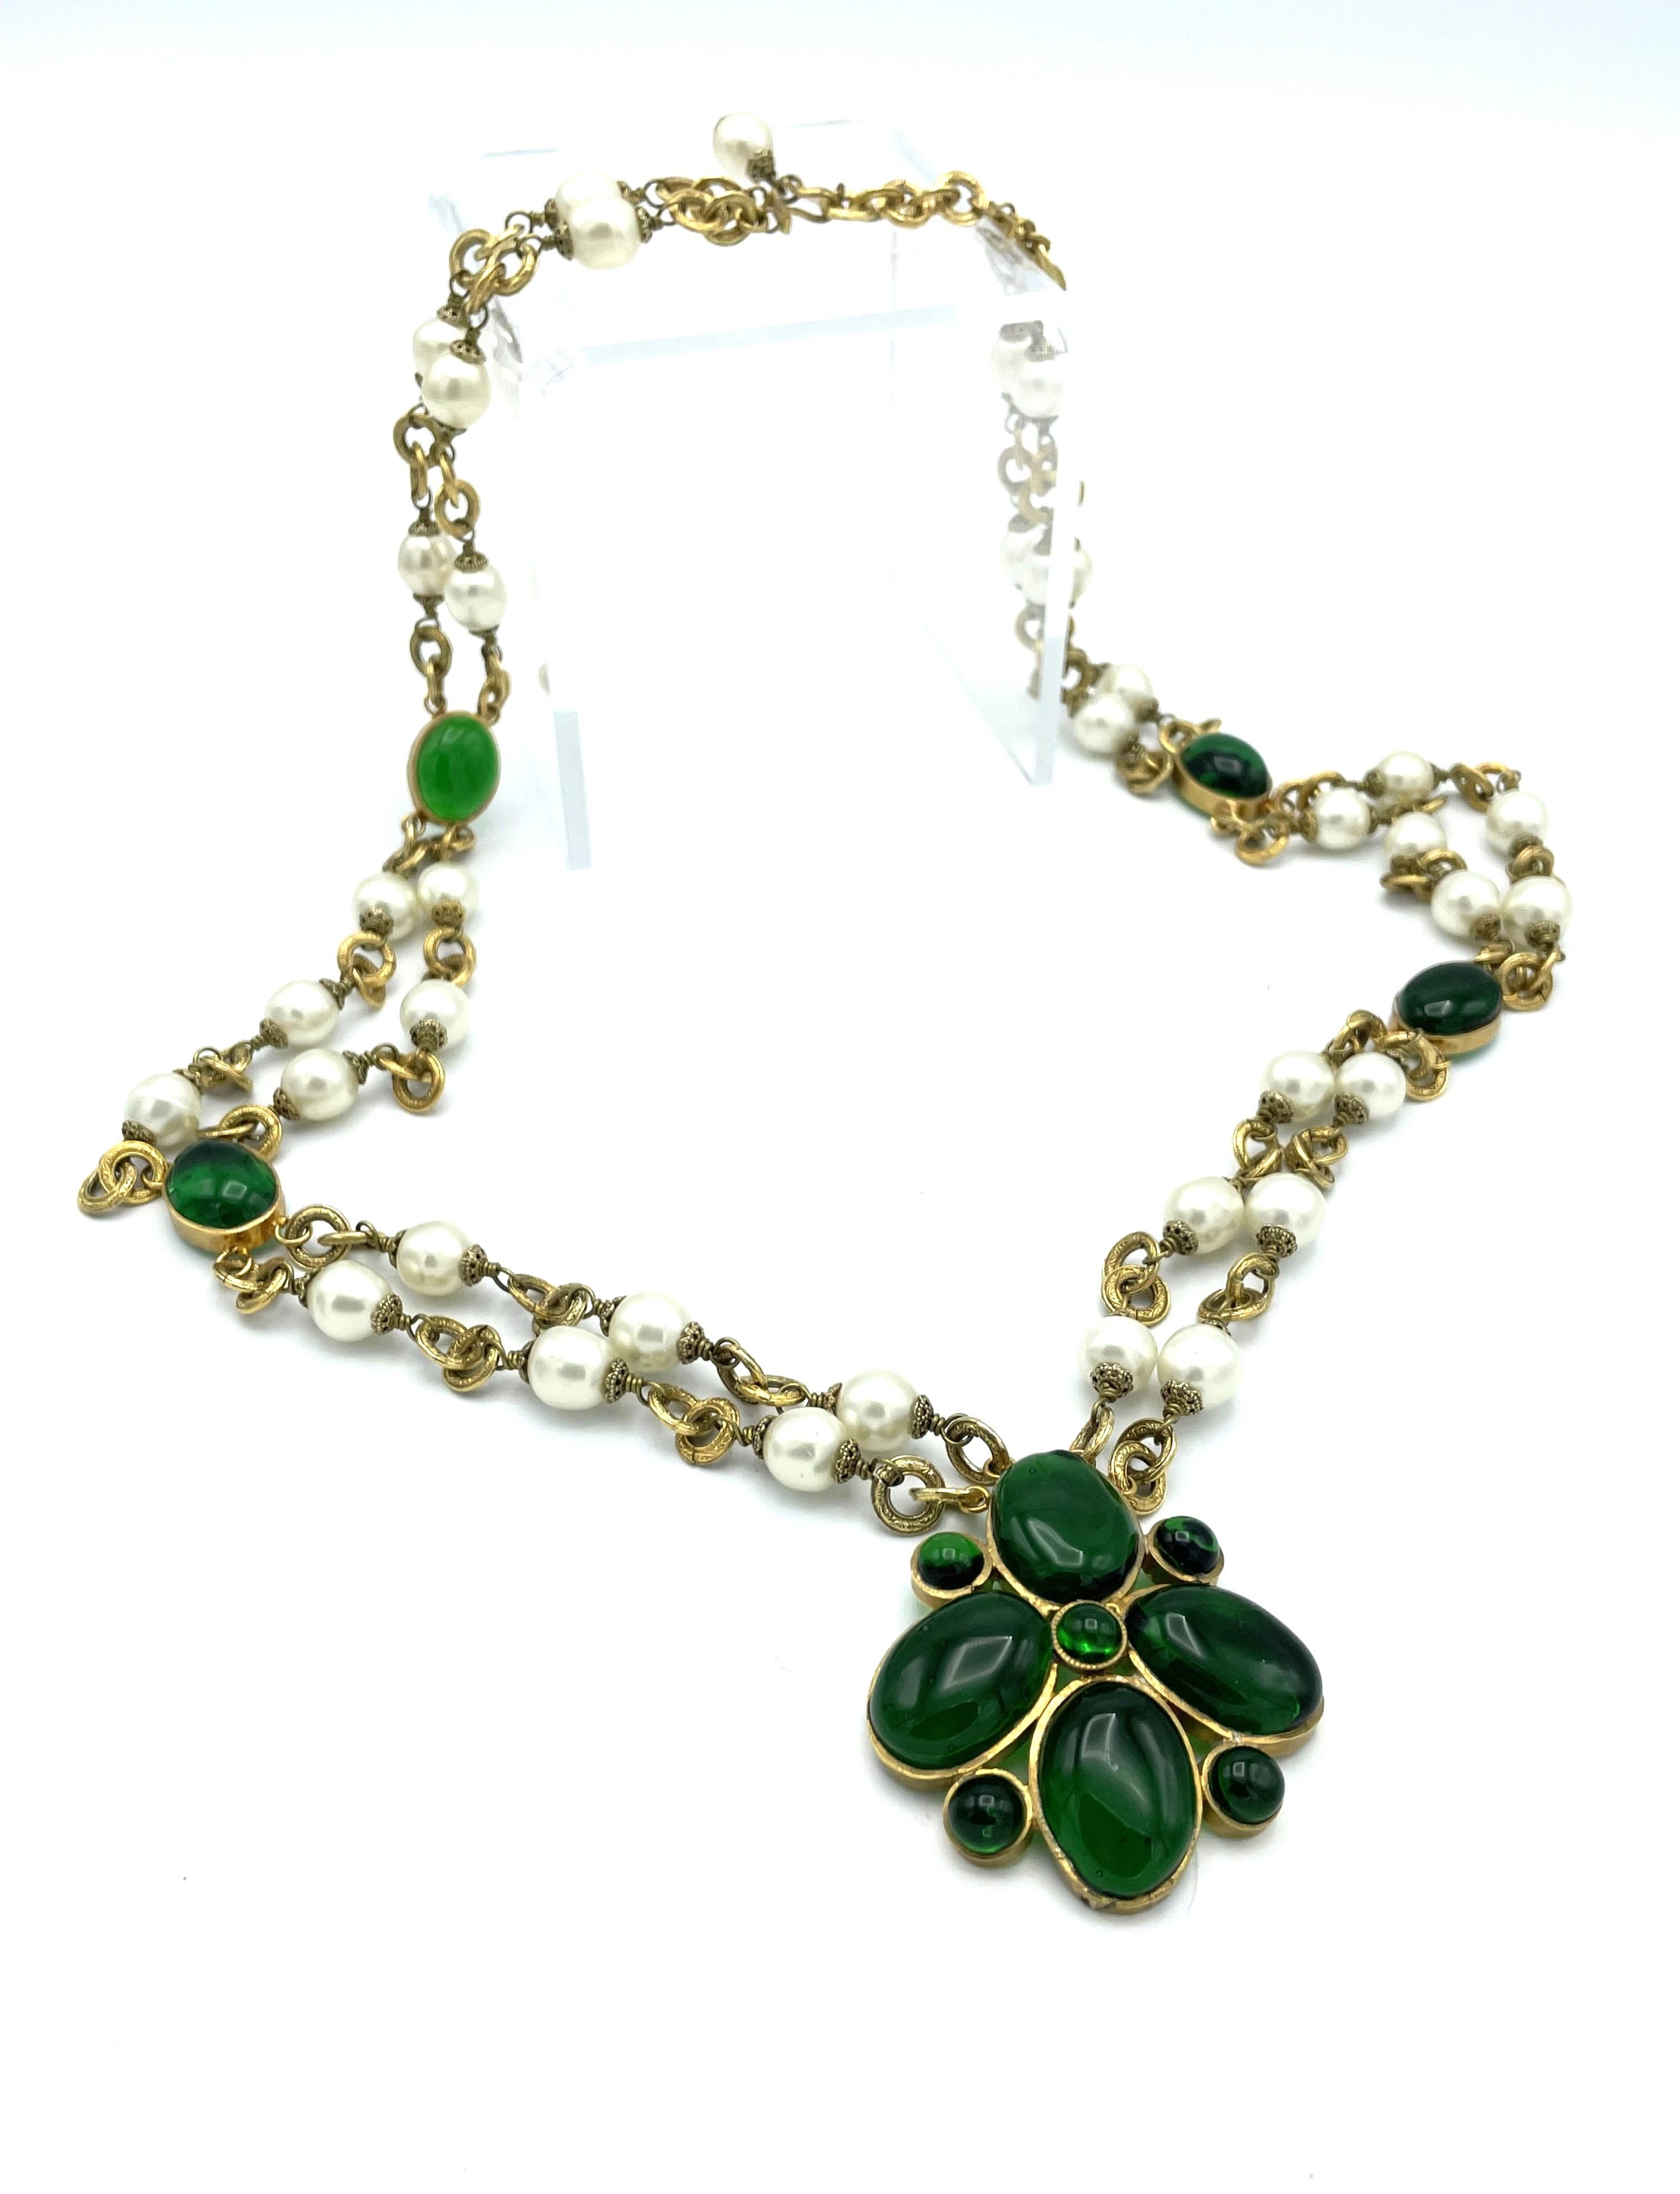 Chanel rare and collectible double strand necklace with a green center pendant from the House of Gripoix . Double strand with faux pearl and between oval green Gripoix.

Measurement : Pendant H 5,3 cm x W 5 cm, whole length with the flower pendant